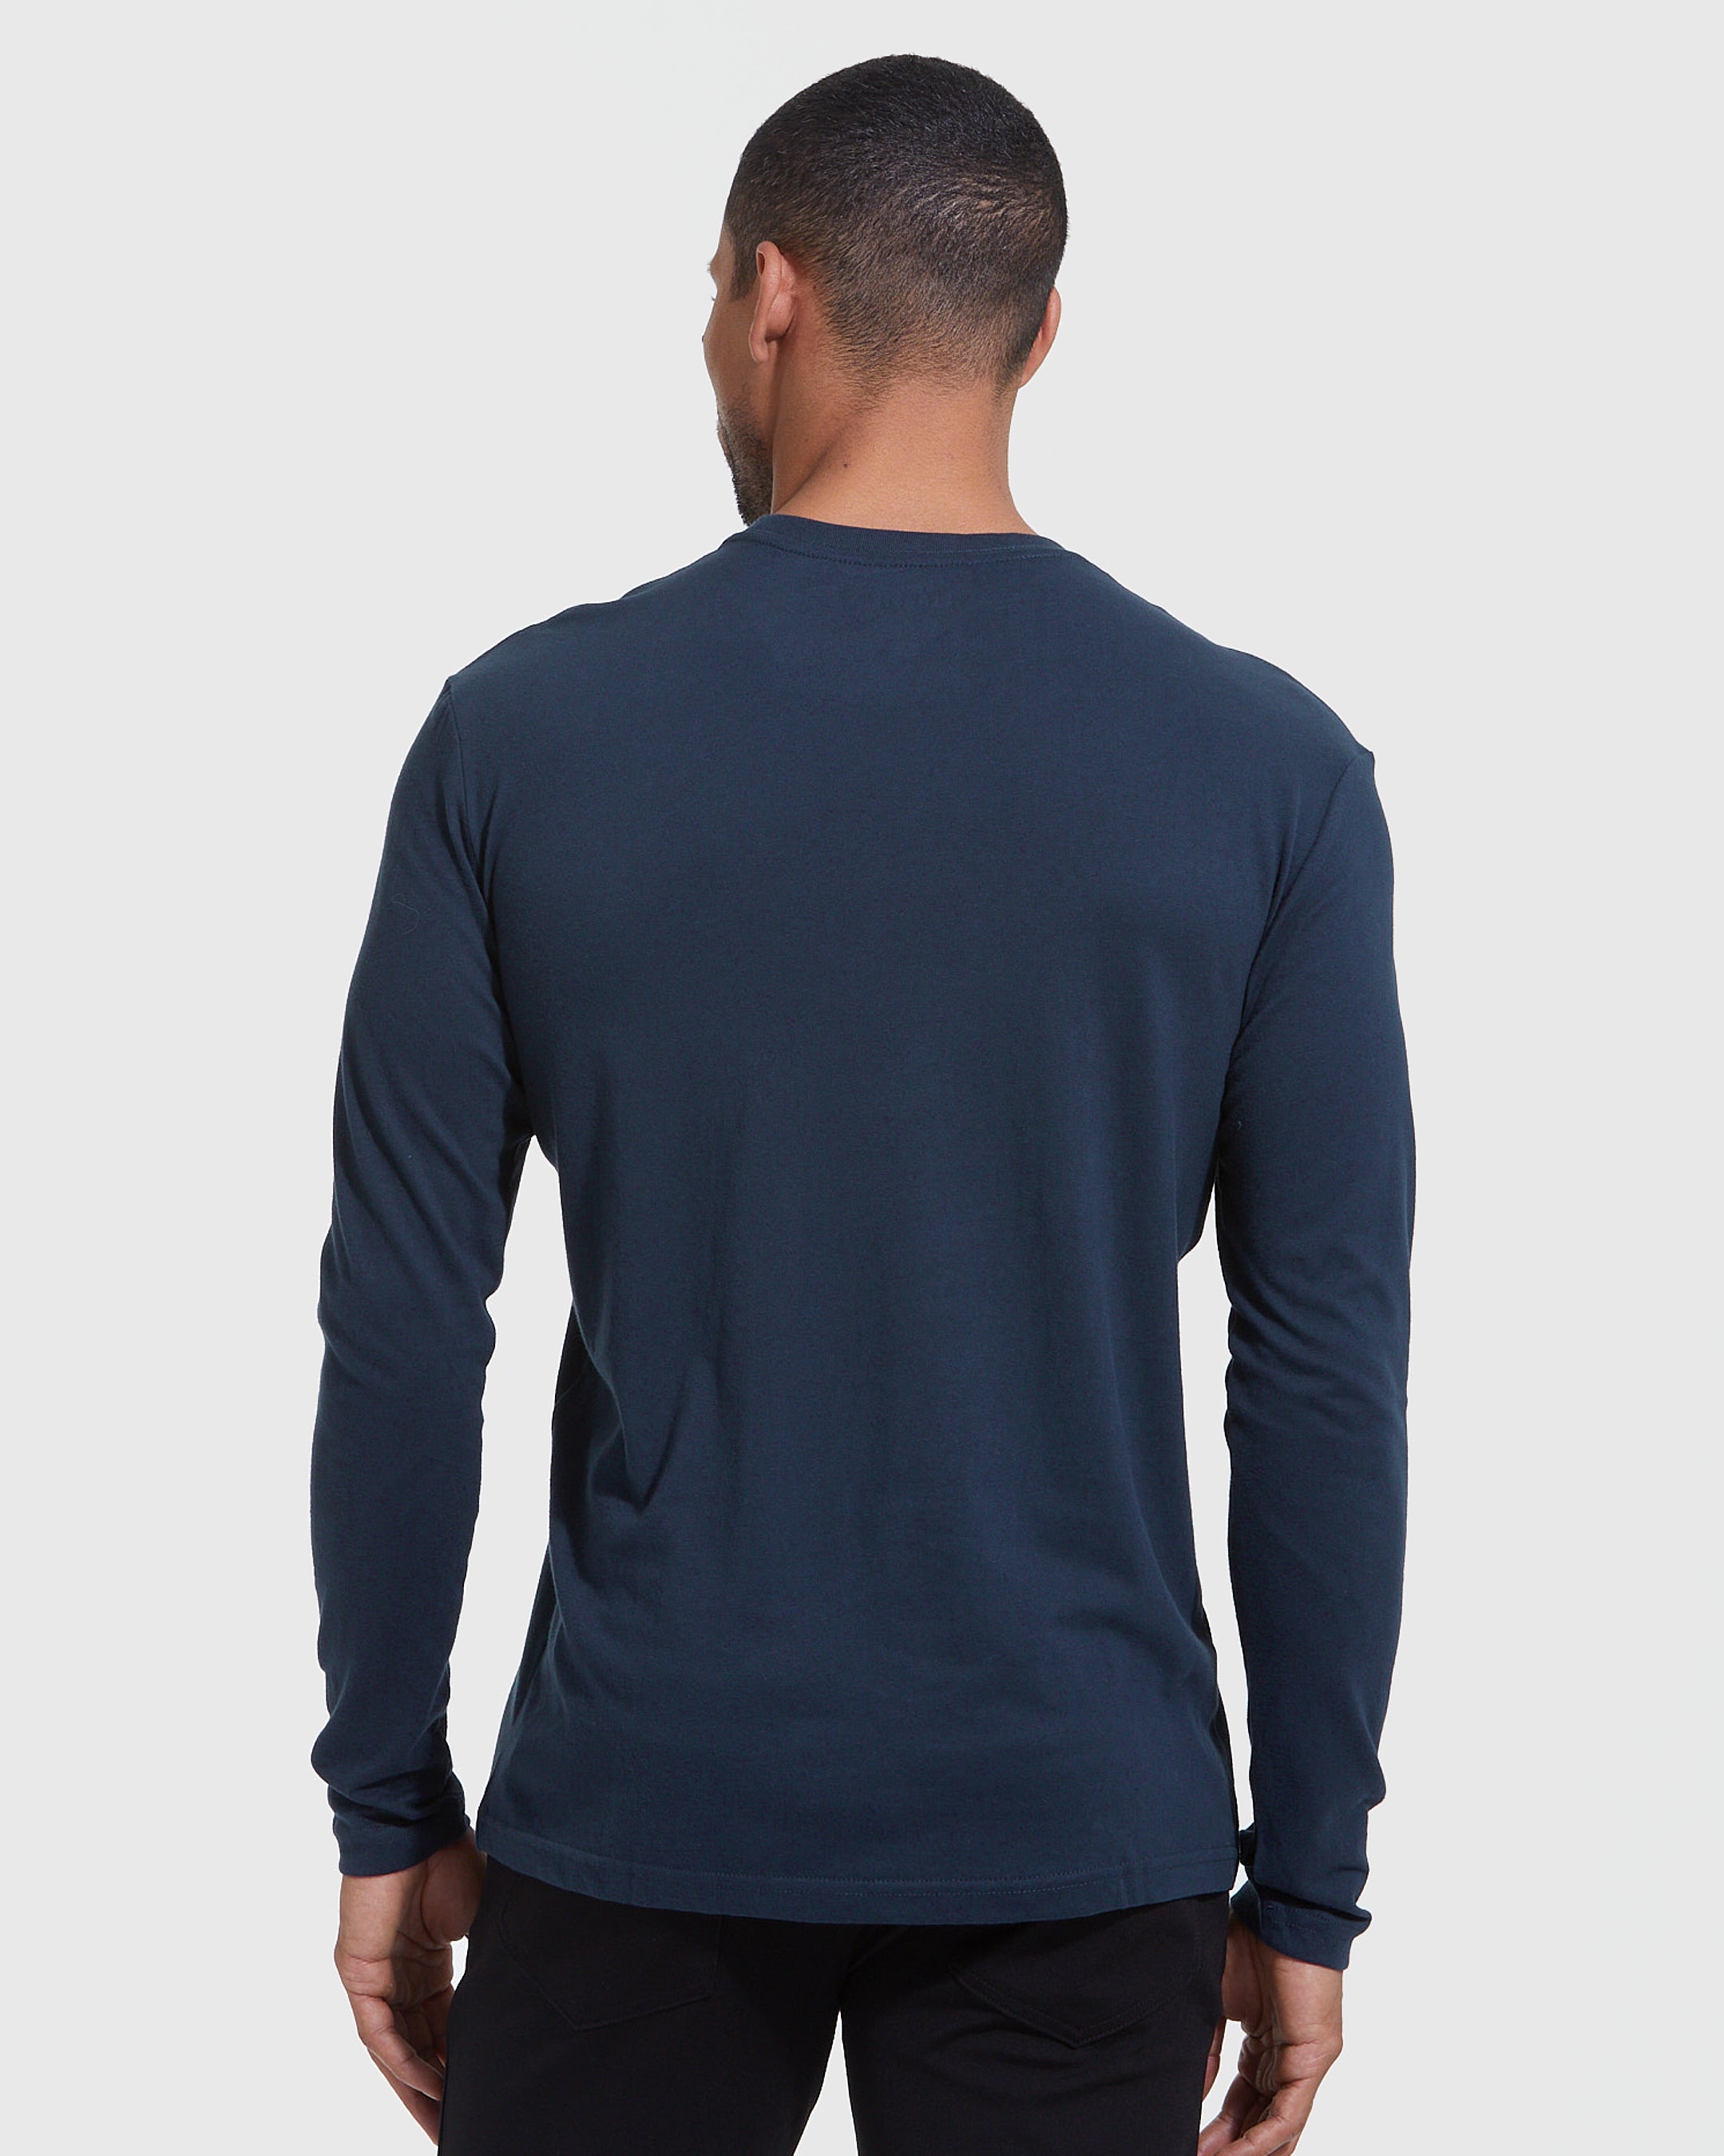 All Navy Long Sleeve Crew 6-Pack